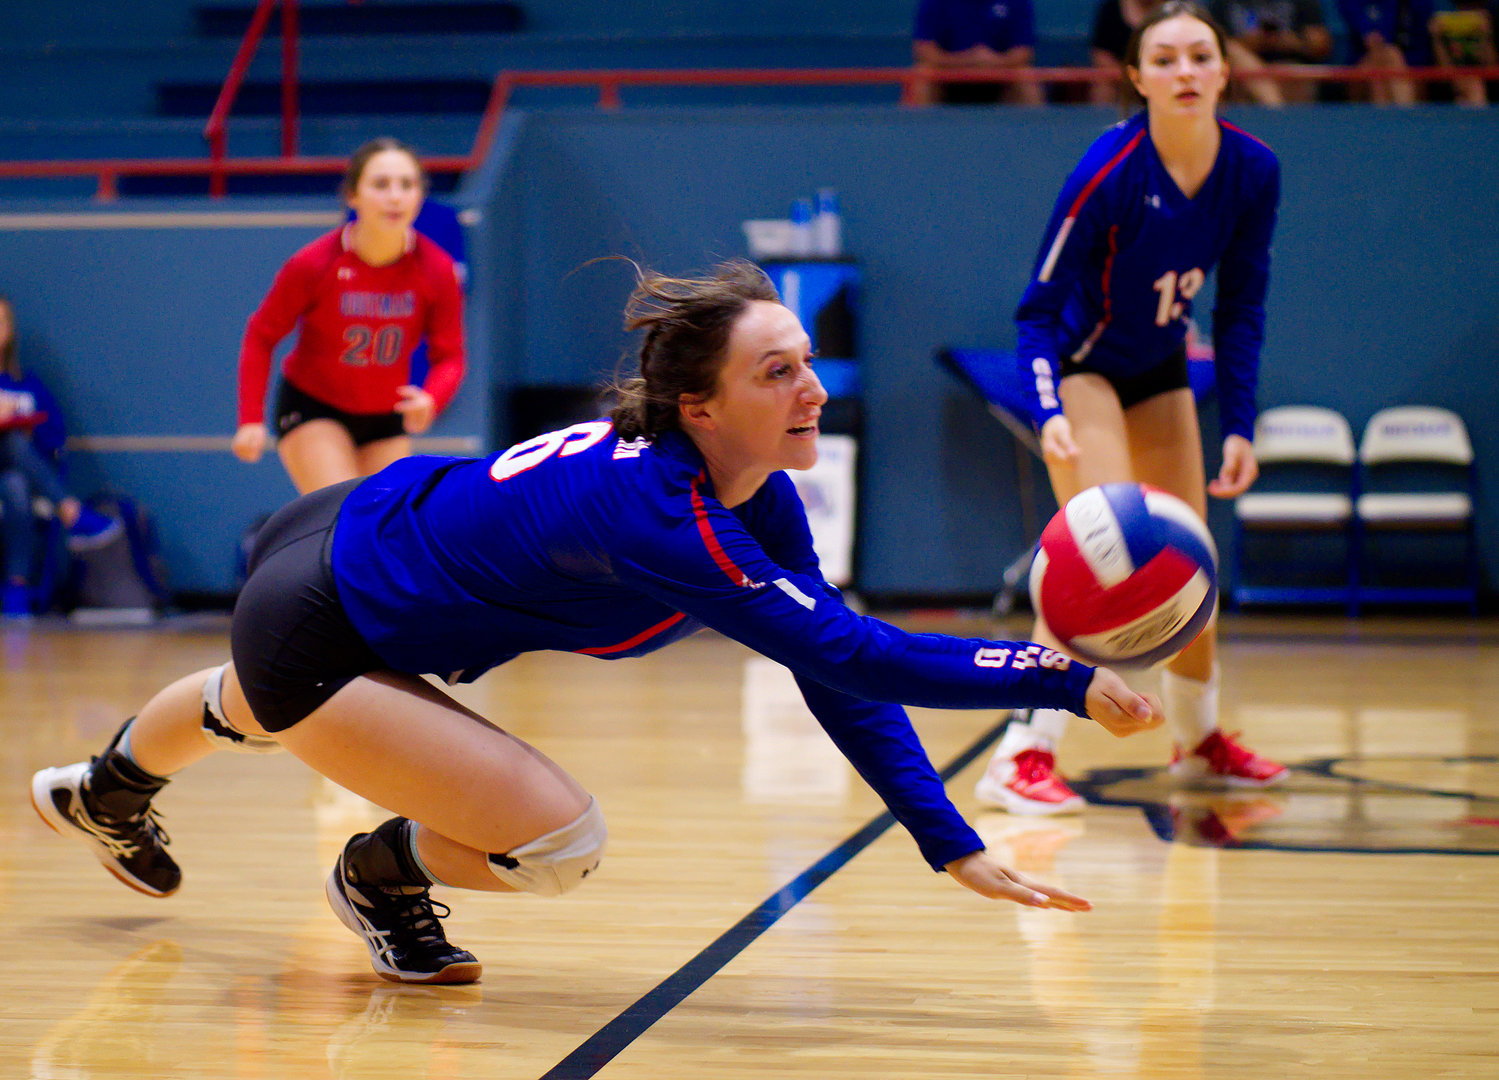 Peyton Kruckner lunges to dig out the low ball. [view more volleyball shots]